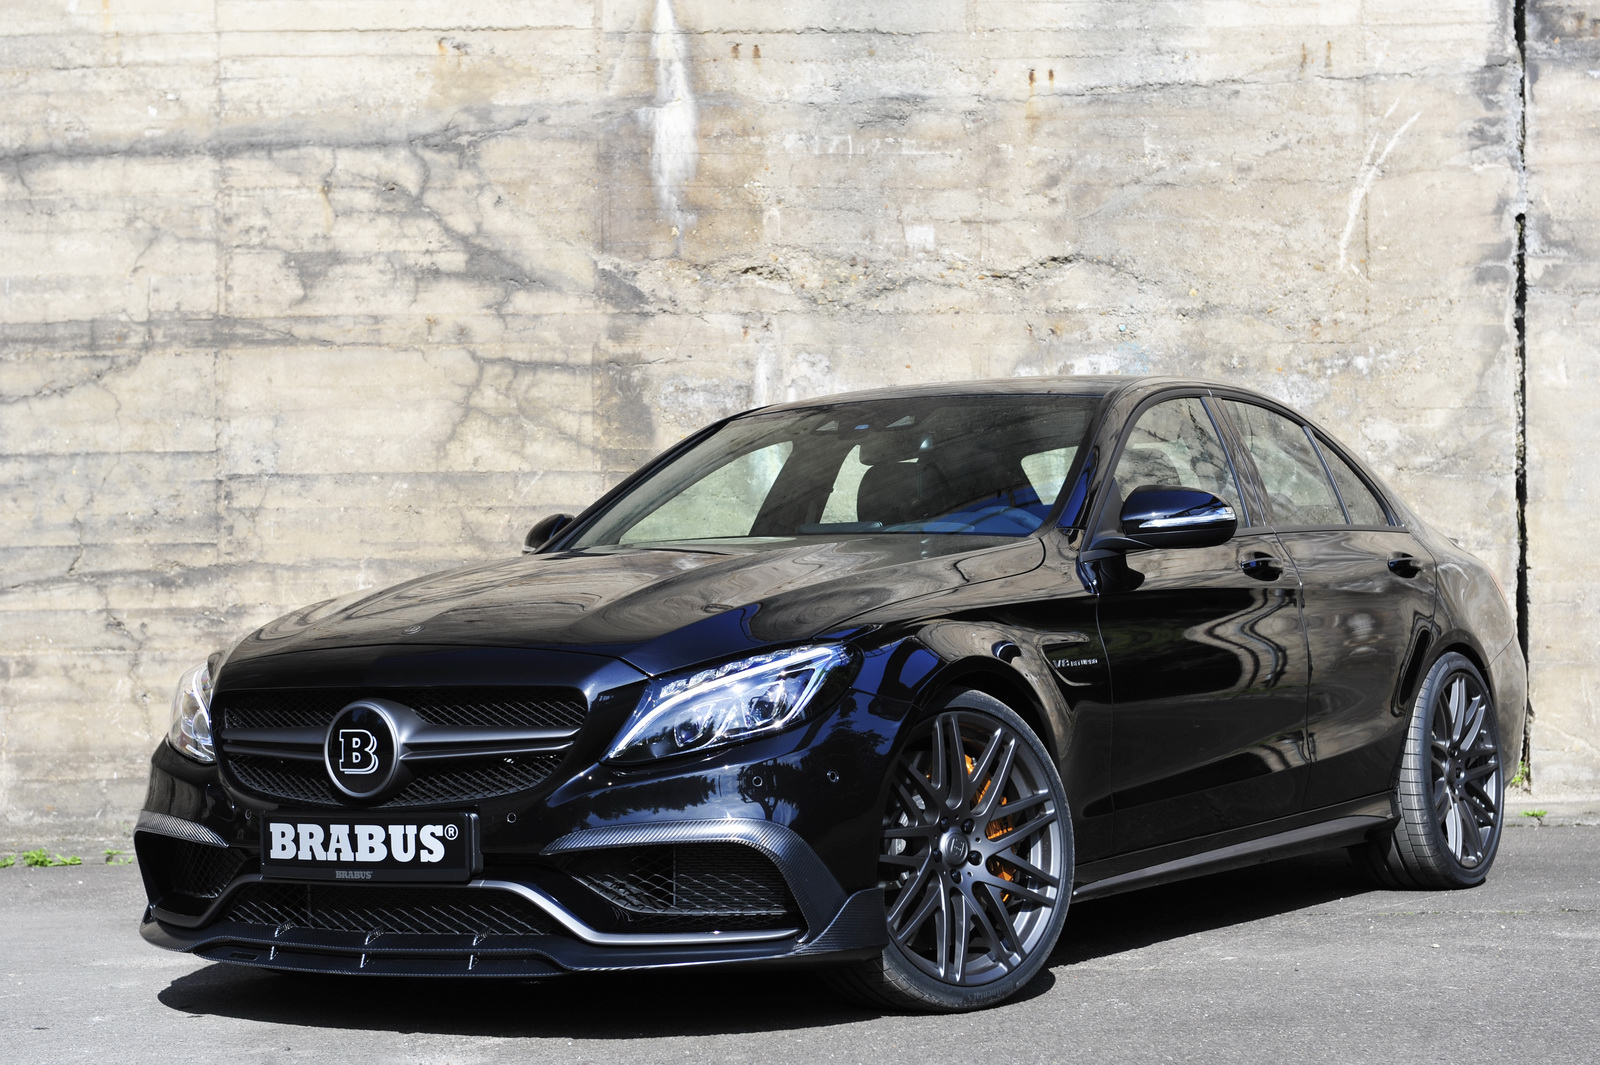 Brabus Chosen as the Most Popular Tuning Brand for 11th Time